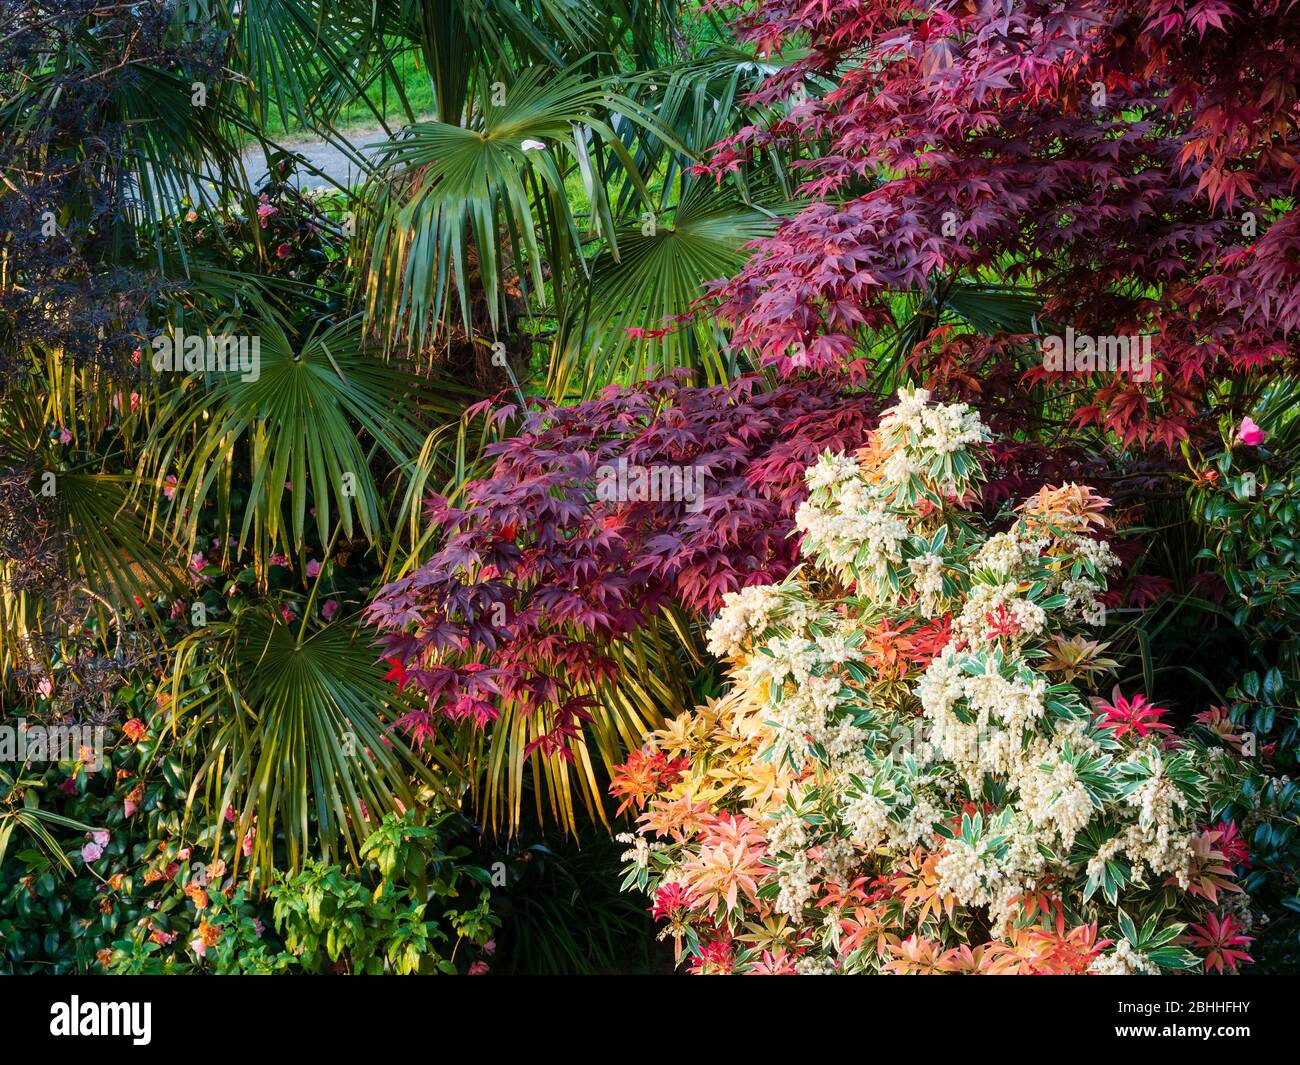 Spring foliage combination of Pieris japonica 'Flaming Silver', Acer palmatum 'Bloodgood', and Trachycarpus fortunei in an UK garden Stock Photo